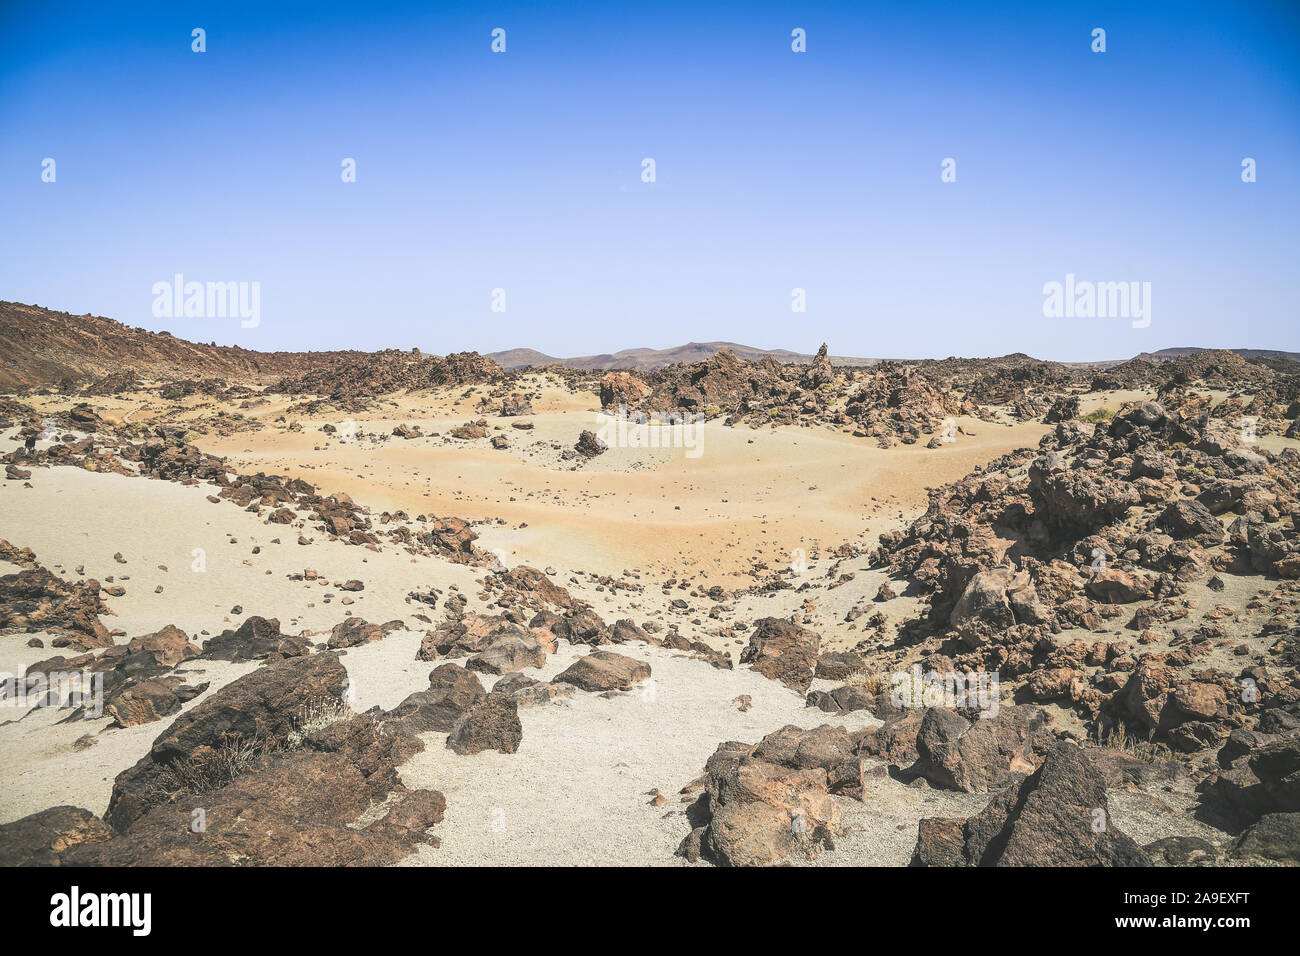 Panorama view of the Teide National Park. Rocks of volcanic origin and sand in Tenerife island, Canary Islands in Spain. Desert lunar landscape withou Stock Photo